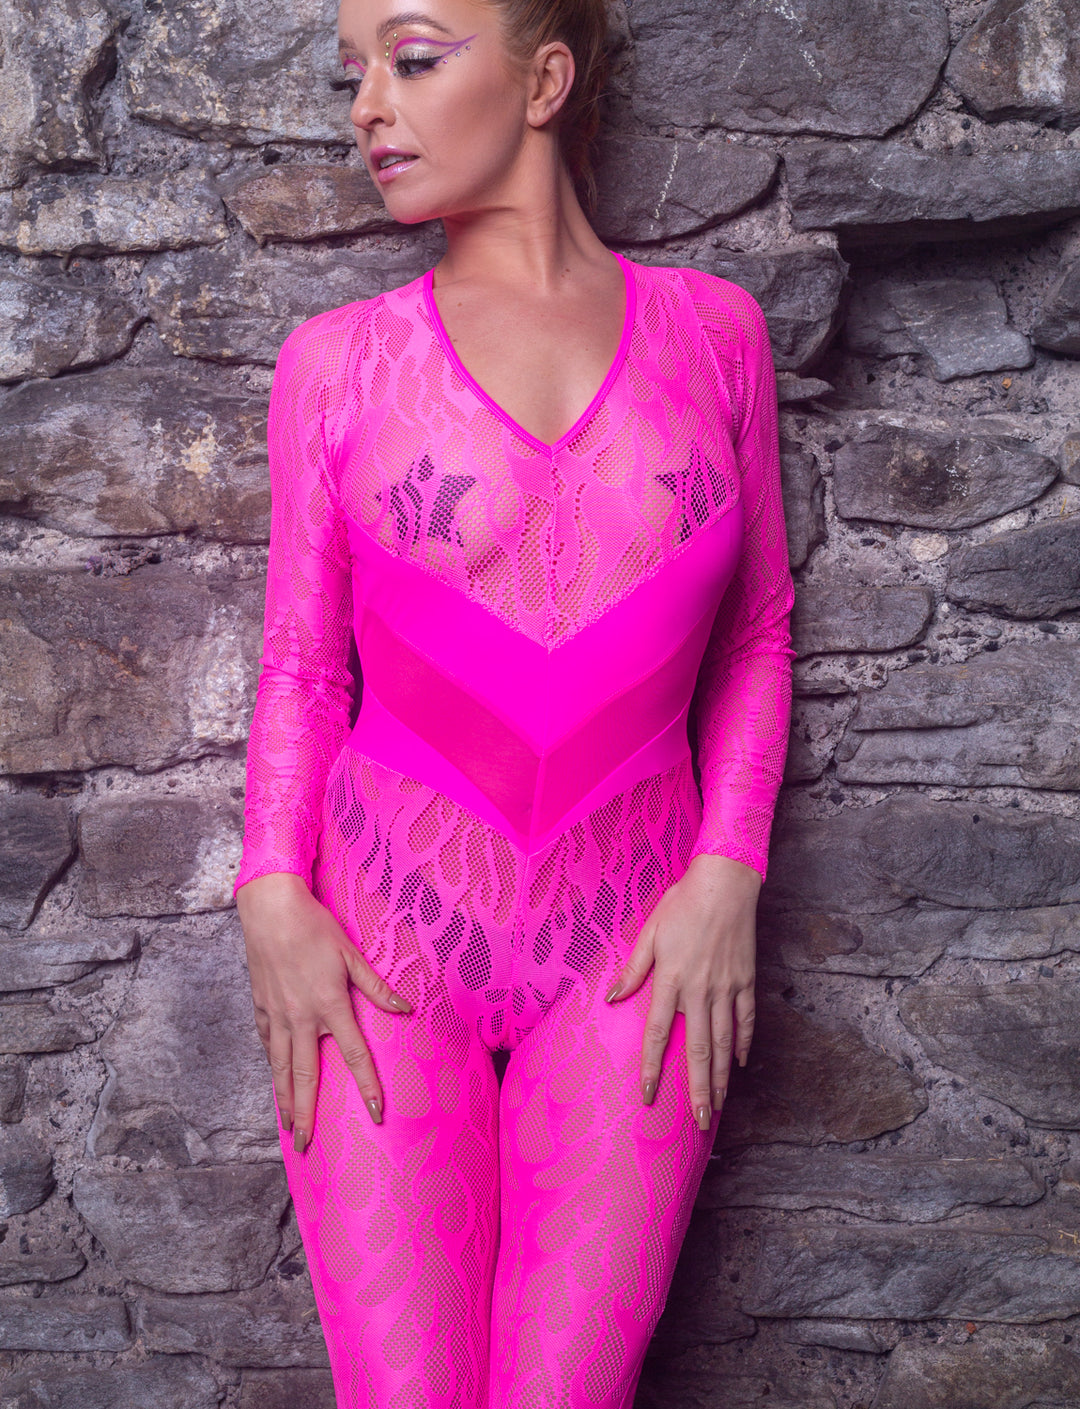 lady wears neon pink flame mesh lace catsuit with sleeves